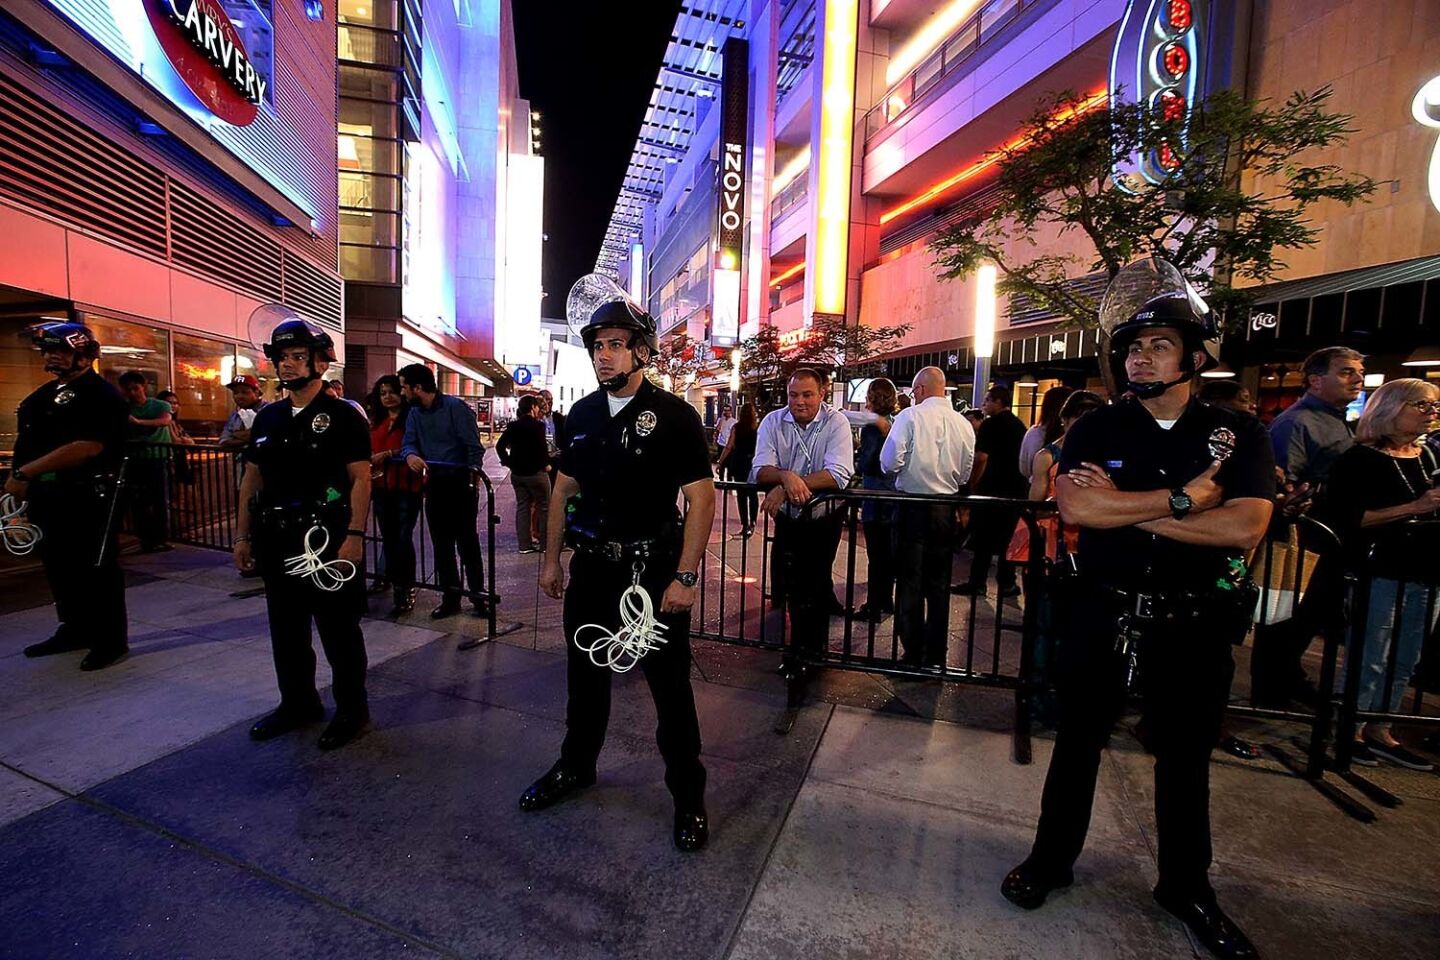 Police officers stand guard at LA Live as anti-Trump demonstrators hit the streets.